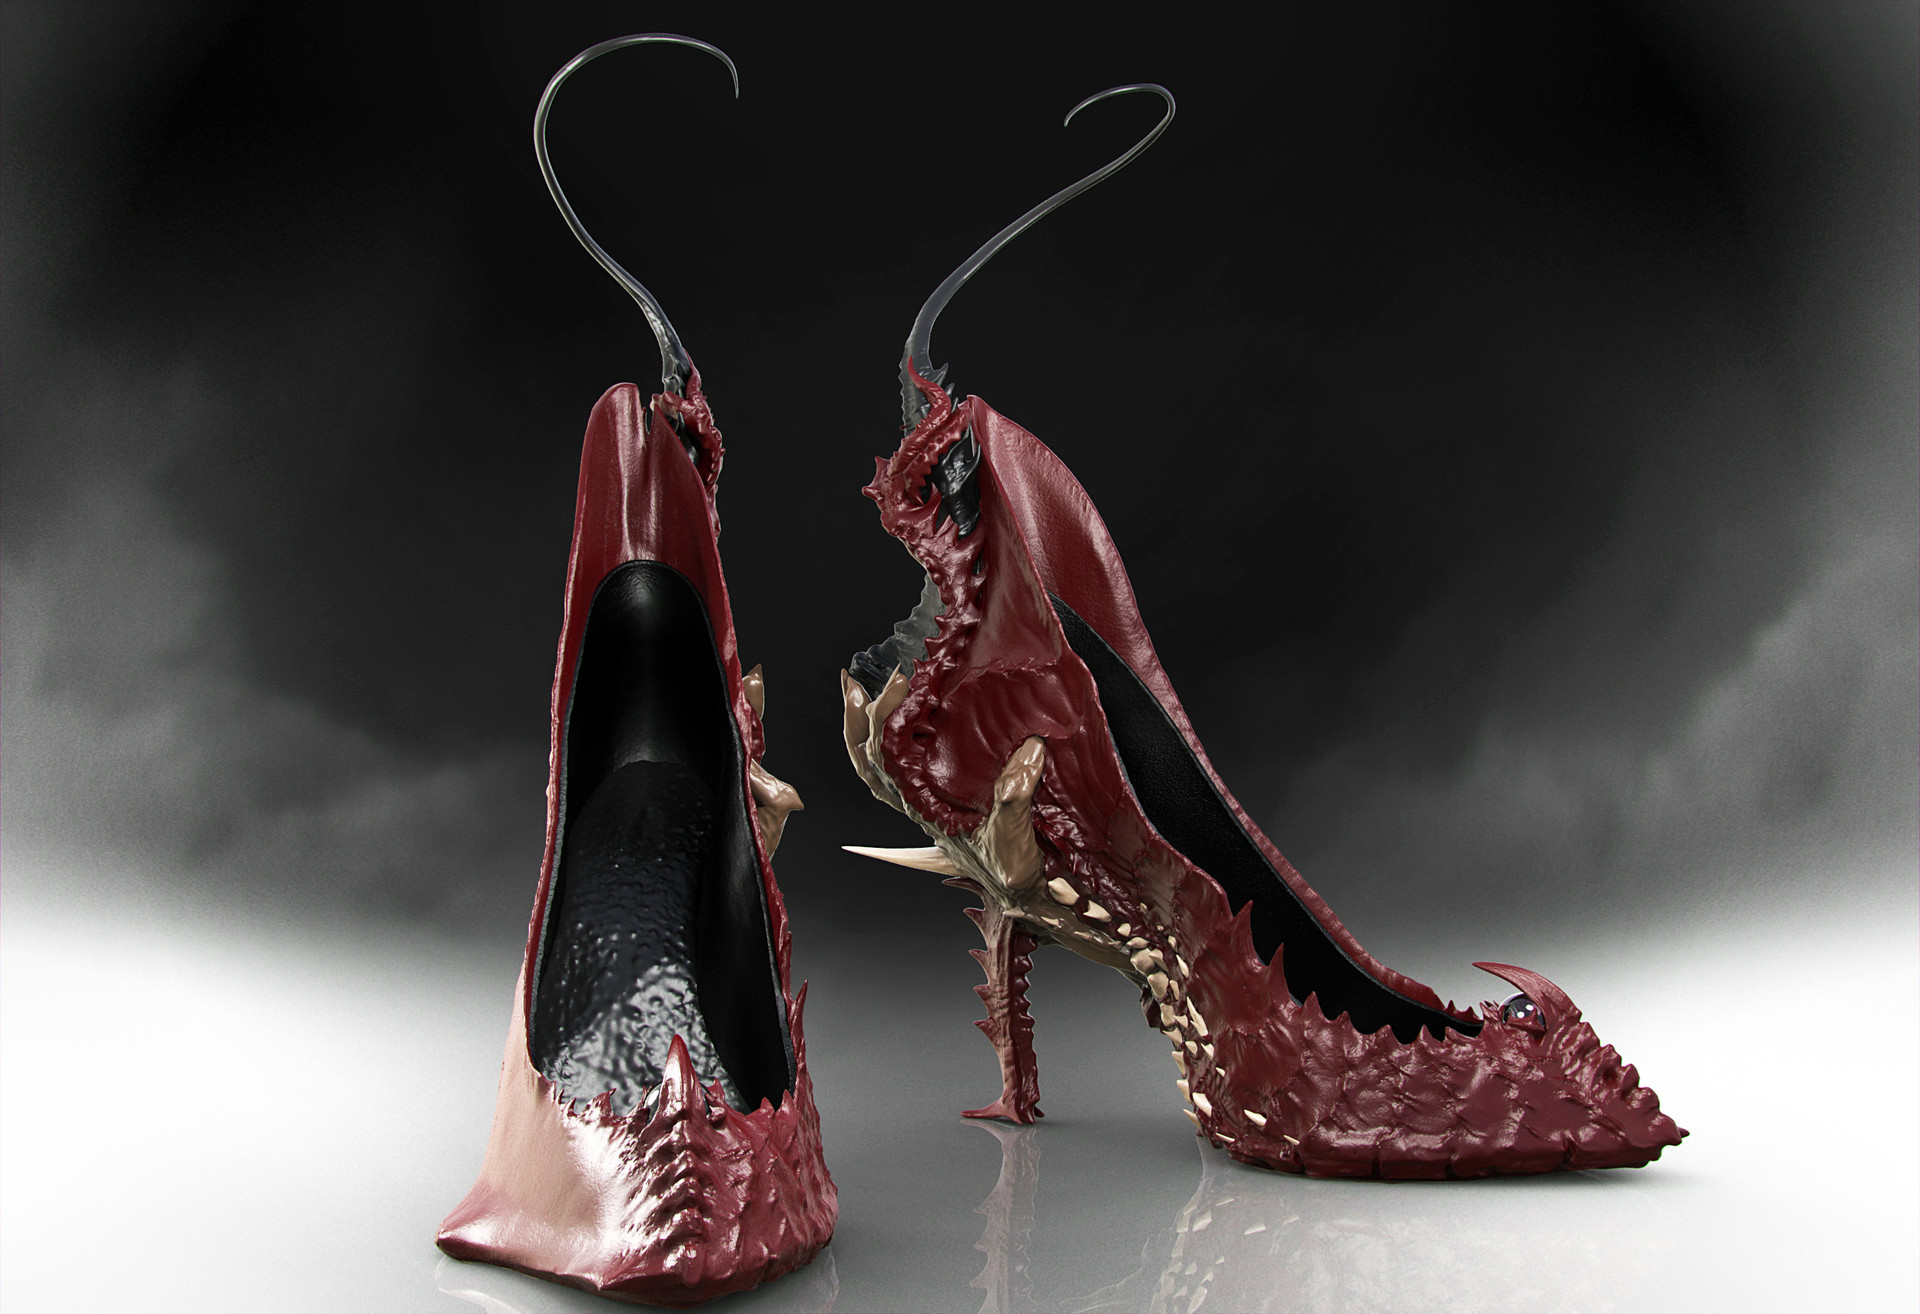 bloody shoes by zeckhell on DeviantArt